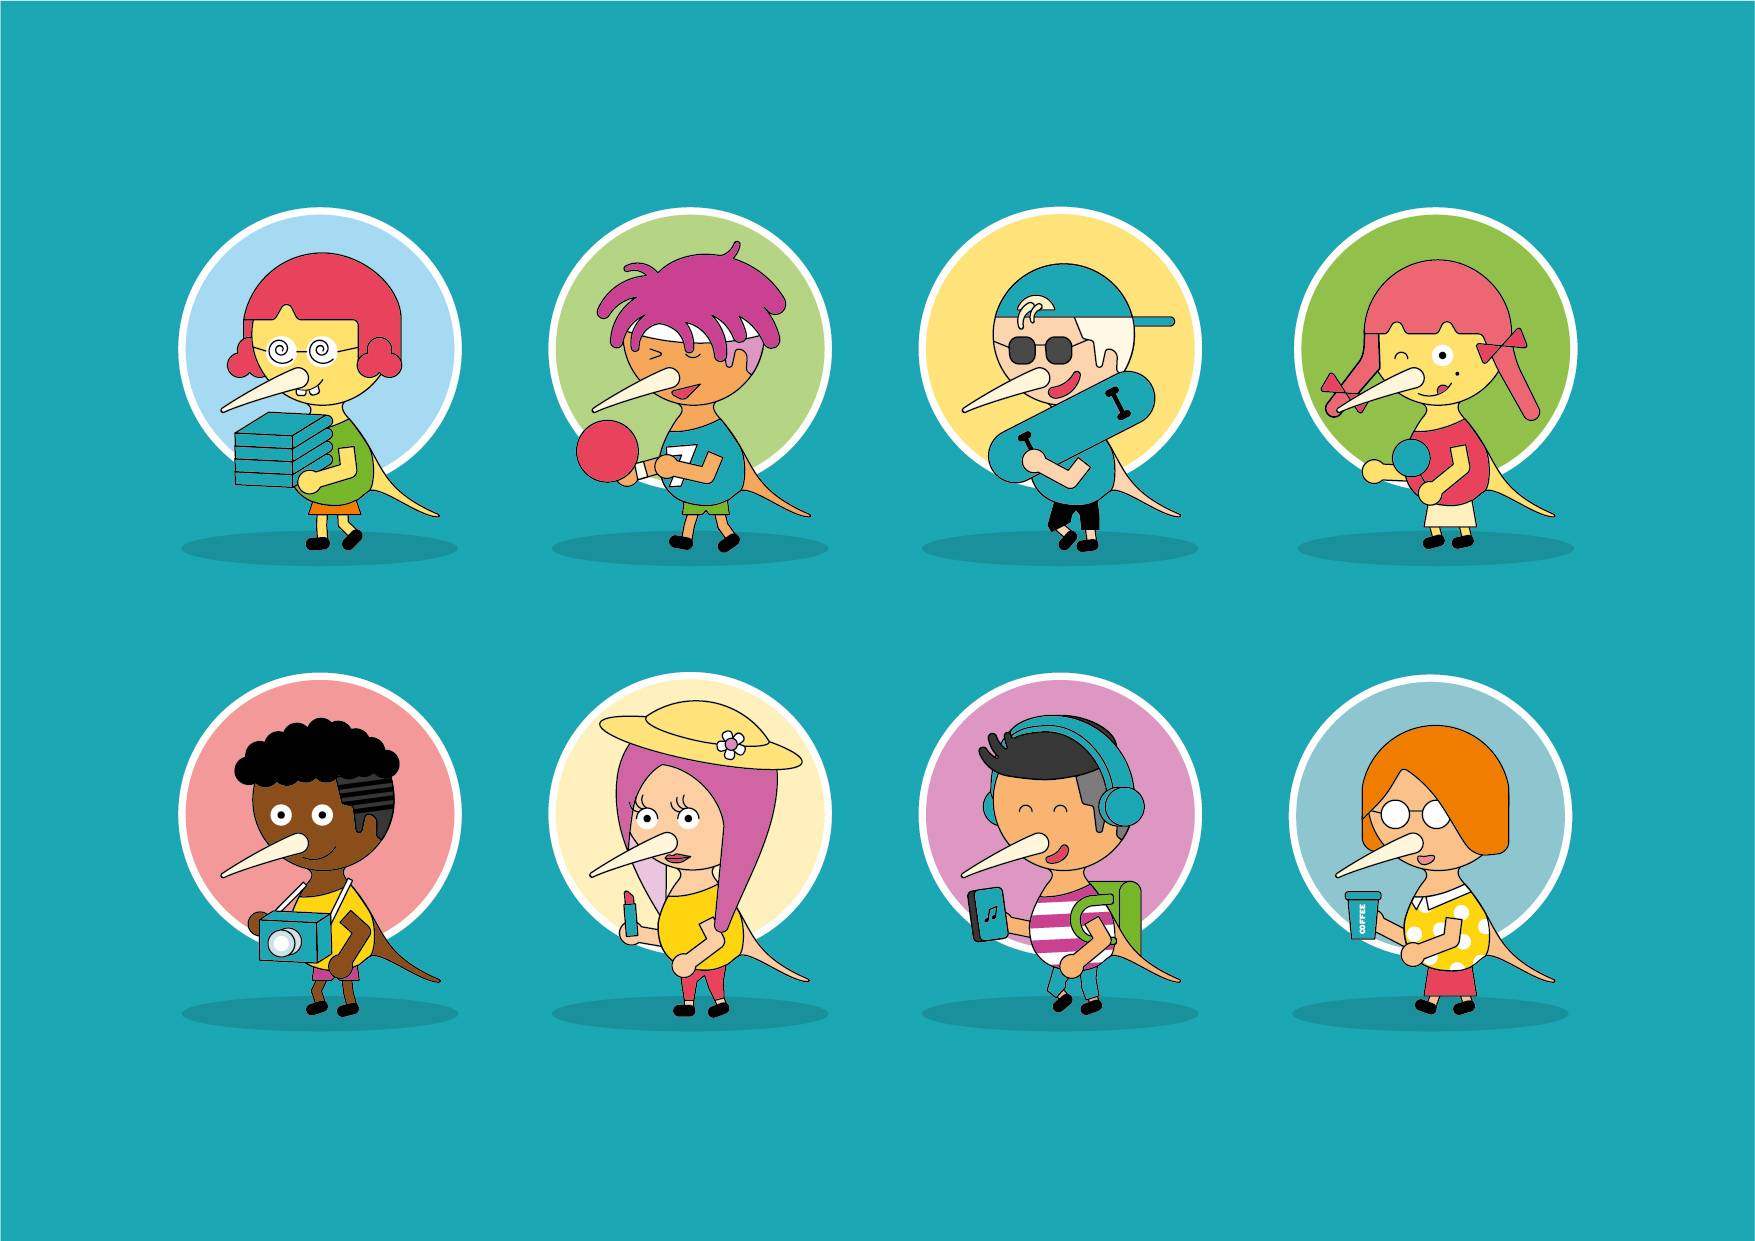 abc Education branding for App character icon design